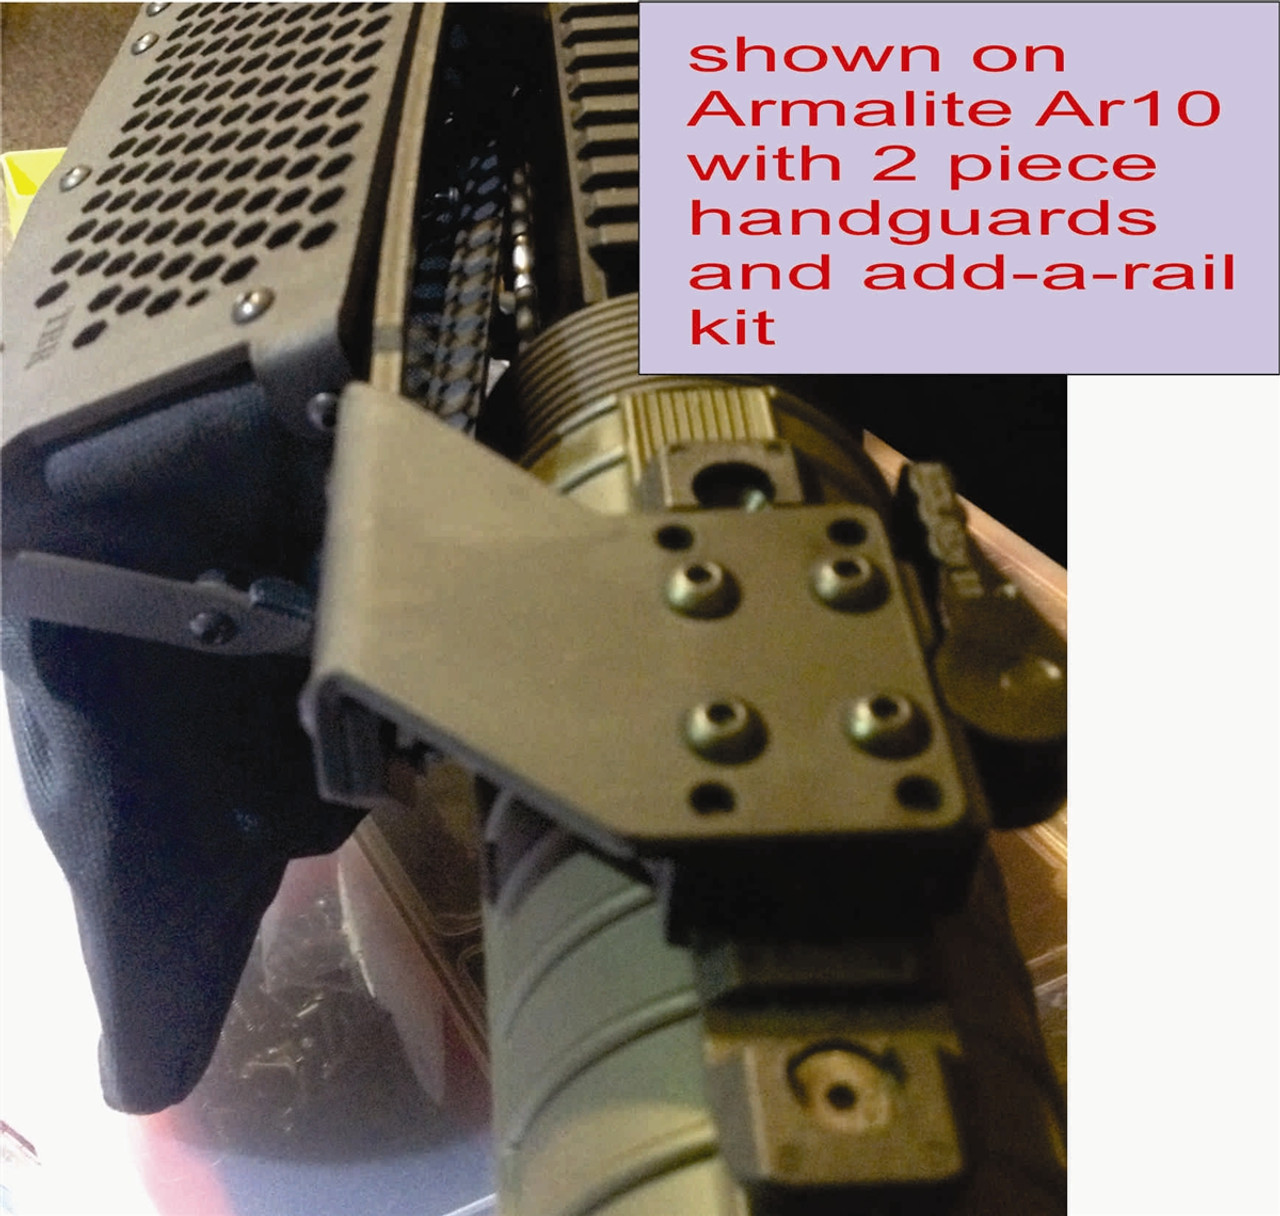 Add a Rail Kit for Delta Ring Handguards